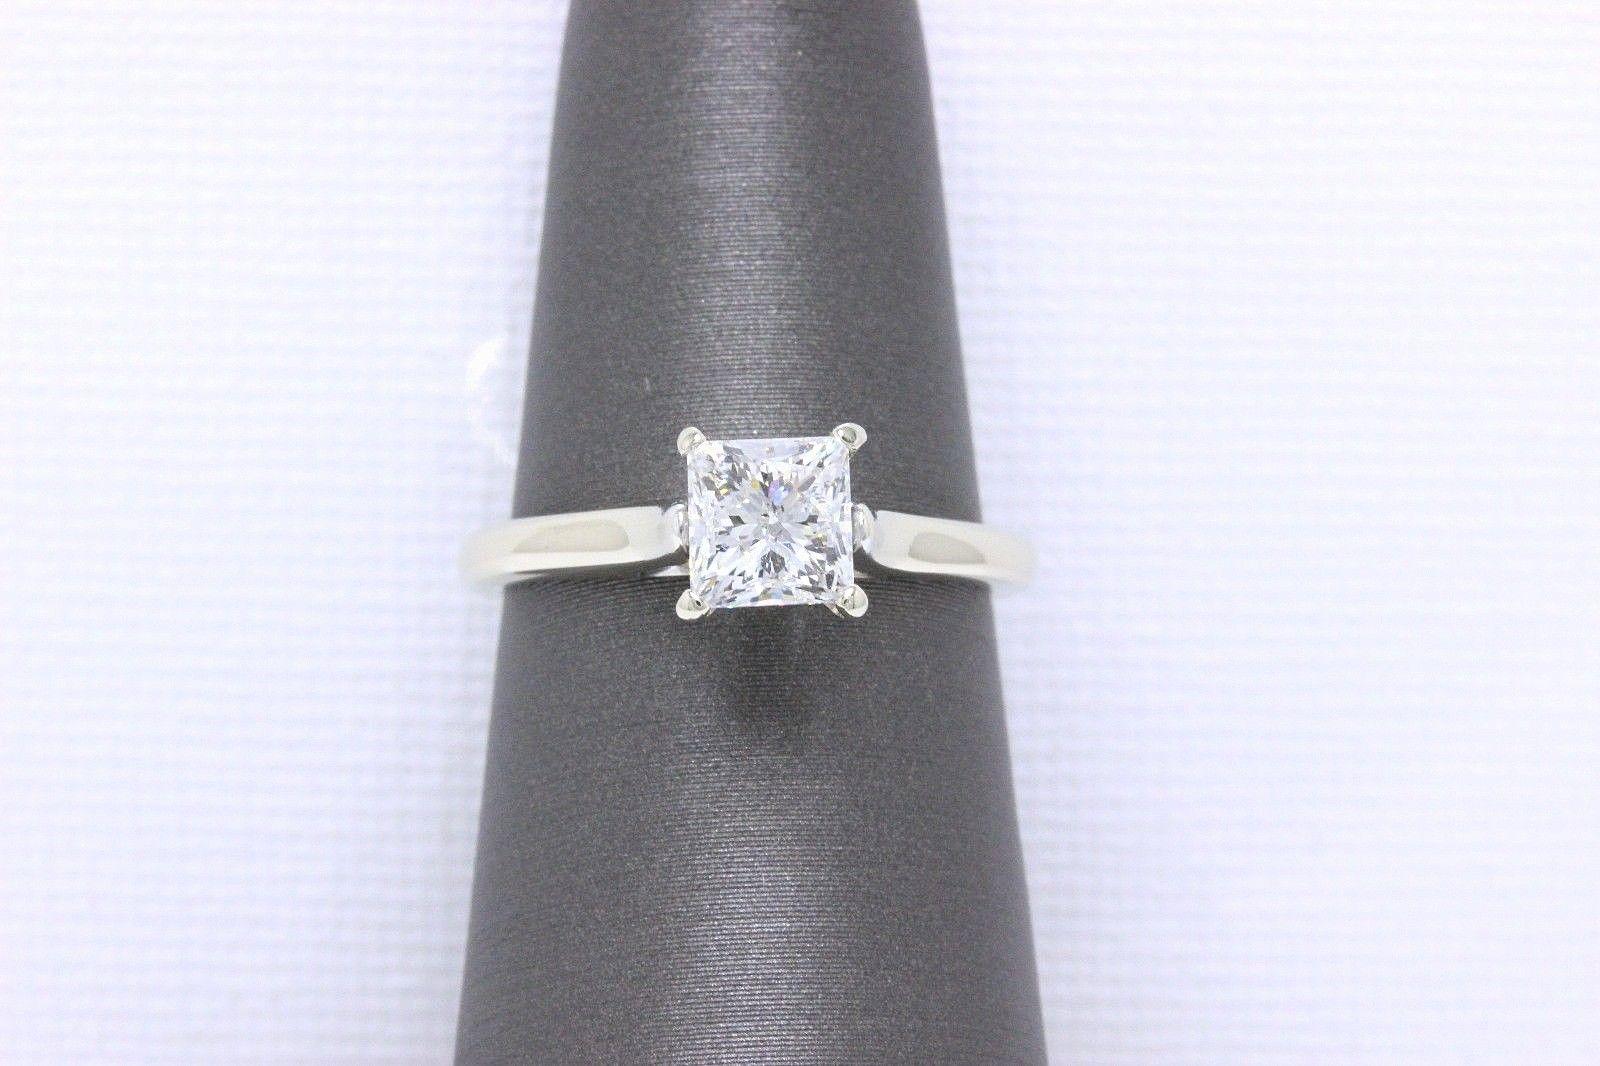 Leo Diamond Princess Cut Solitaire Ring 1.00 Carat G SI2 14 Karat White Gold In Excellent Condition For Sale In San Diego, CA